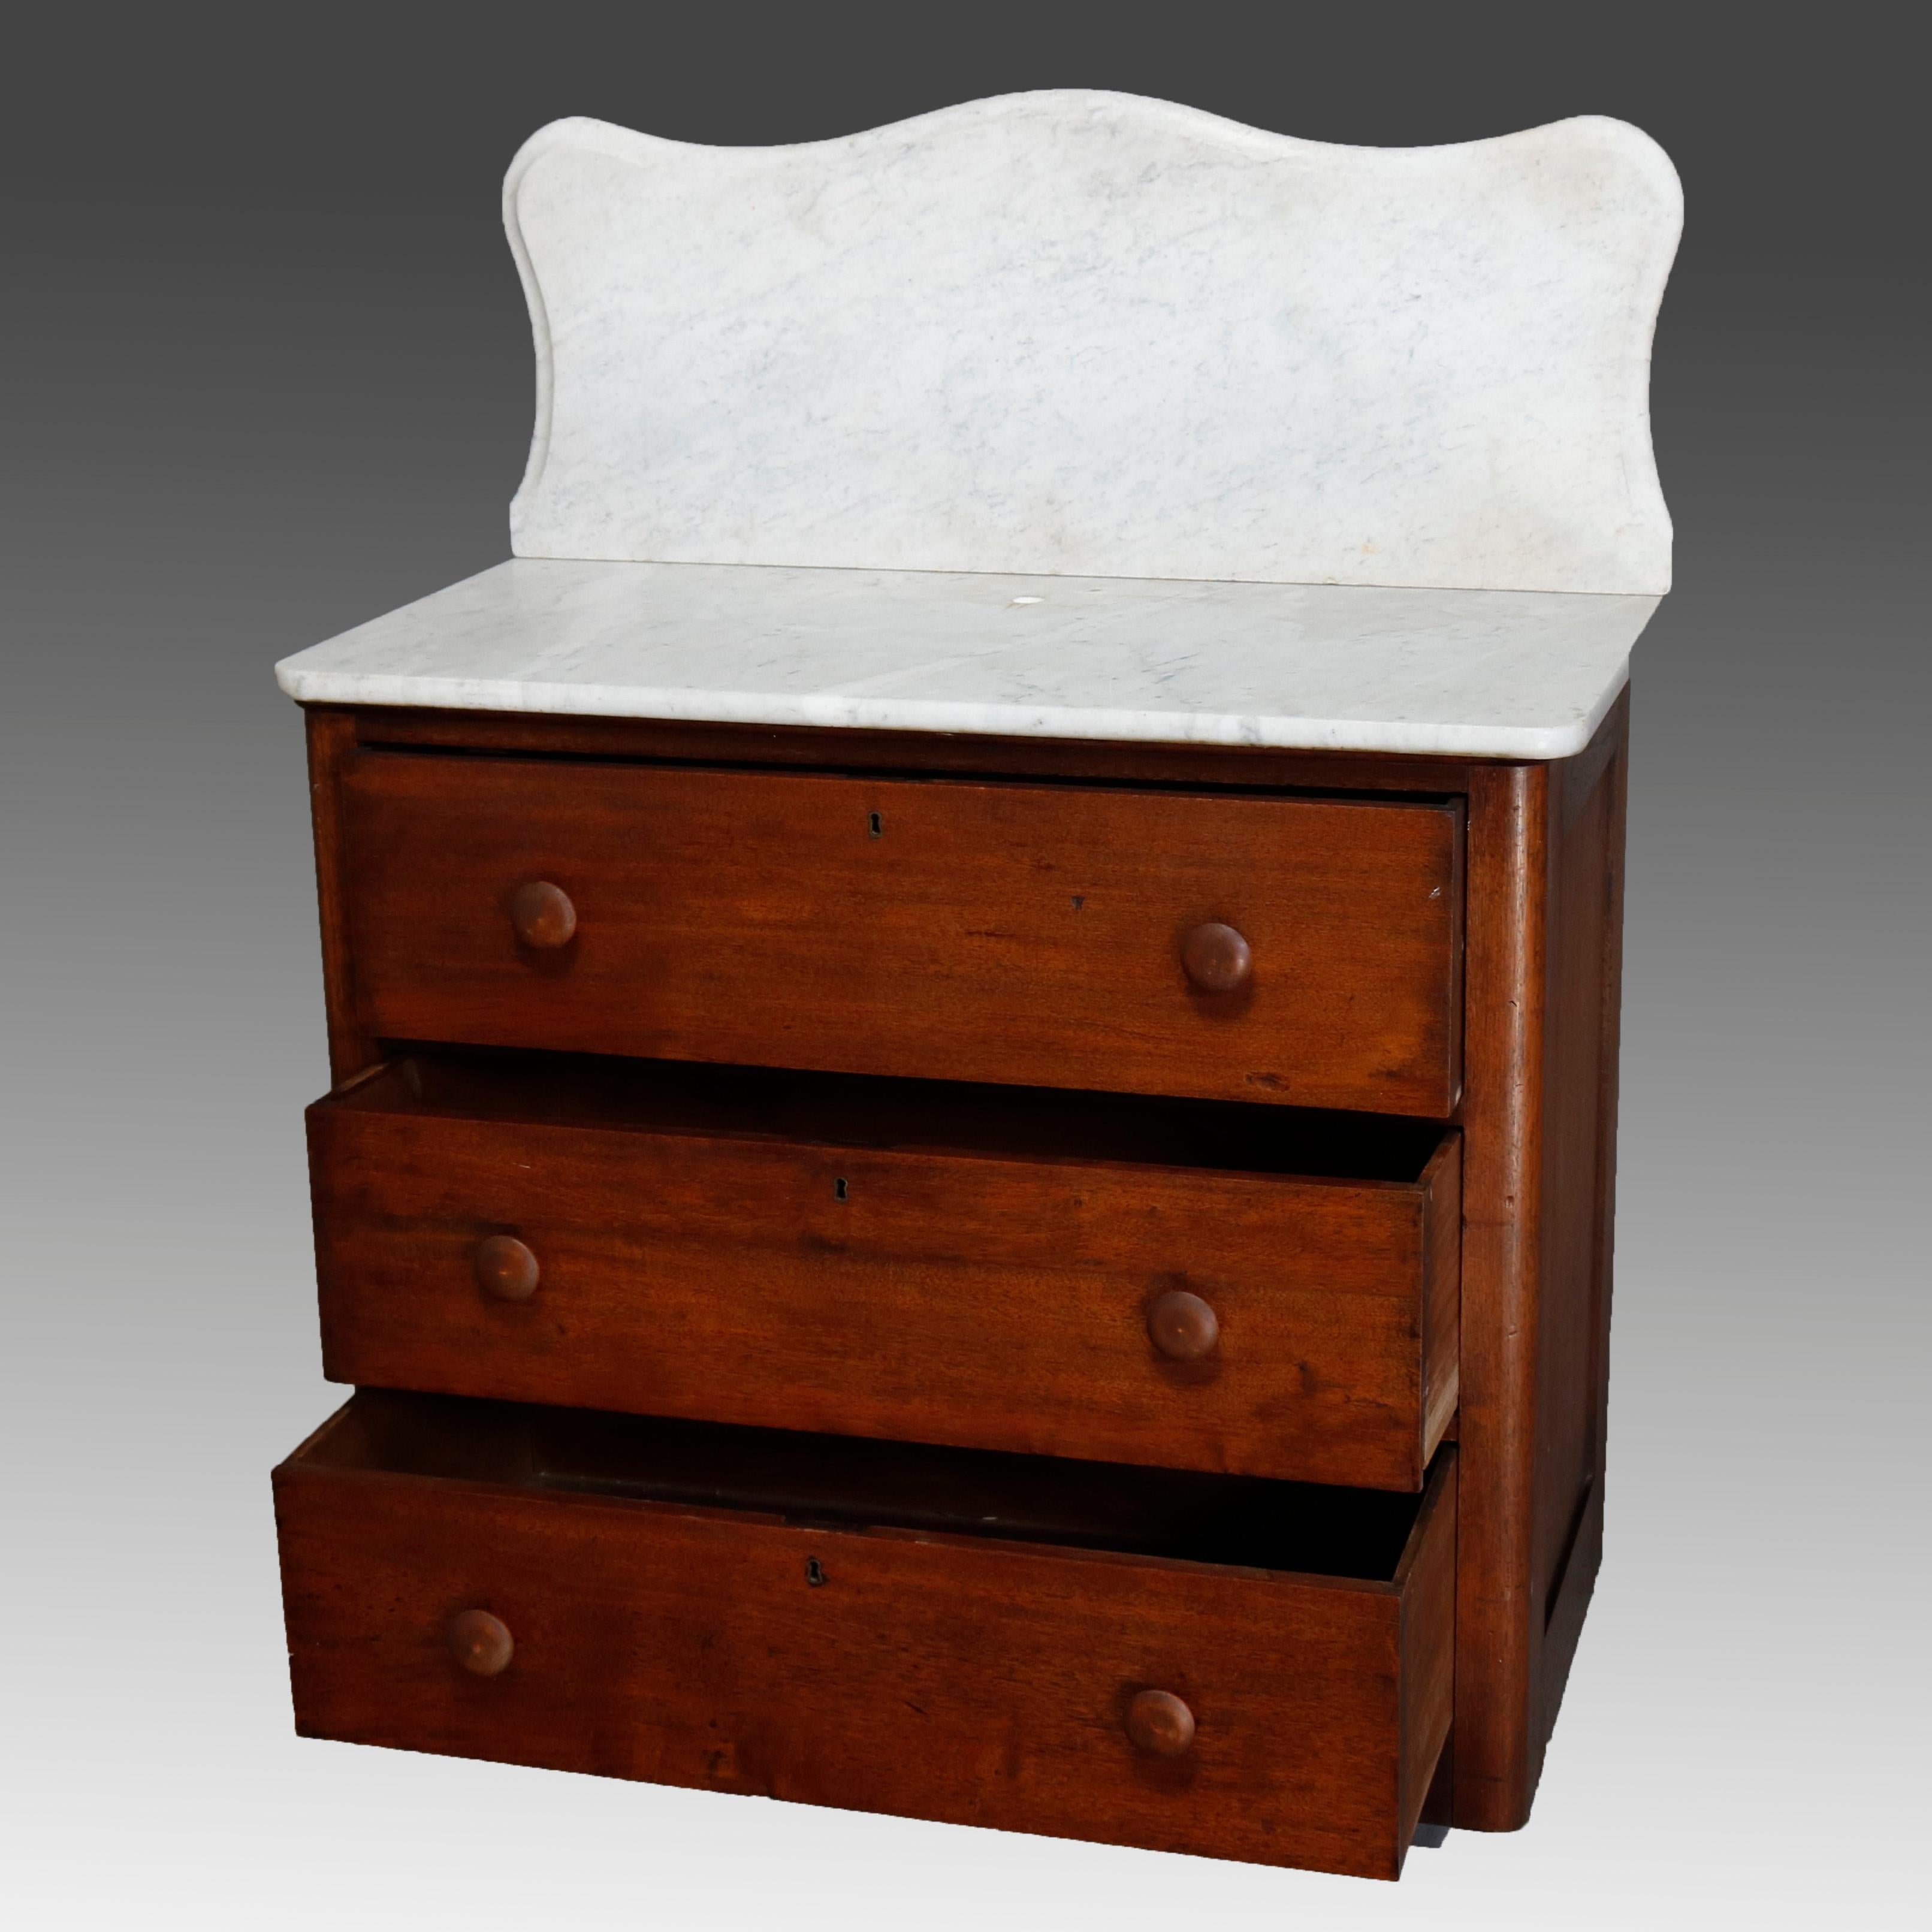 An antique Victorian chest offers marble top with shaped and beveled backsplash surmounting case having three long drawers, circa 1890

***DELIVERY NOTICE – Due to COVID-19 we are employing NO-CONTACT PRACTICES in the transfer of purchased items. 